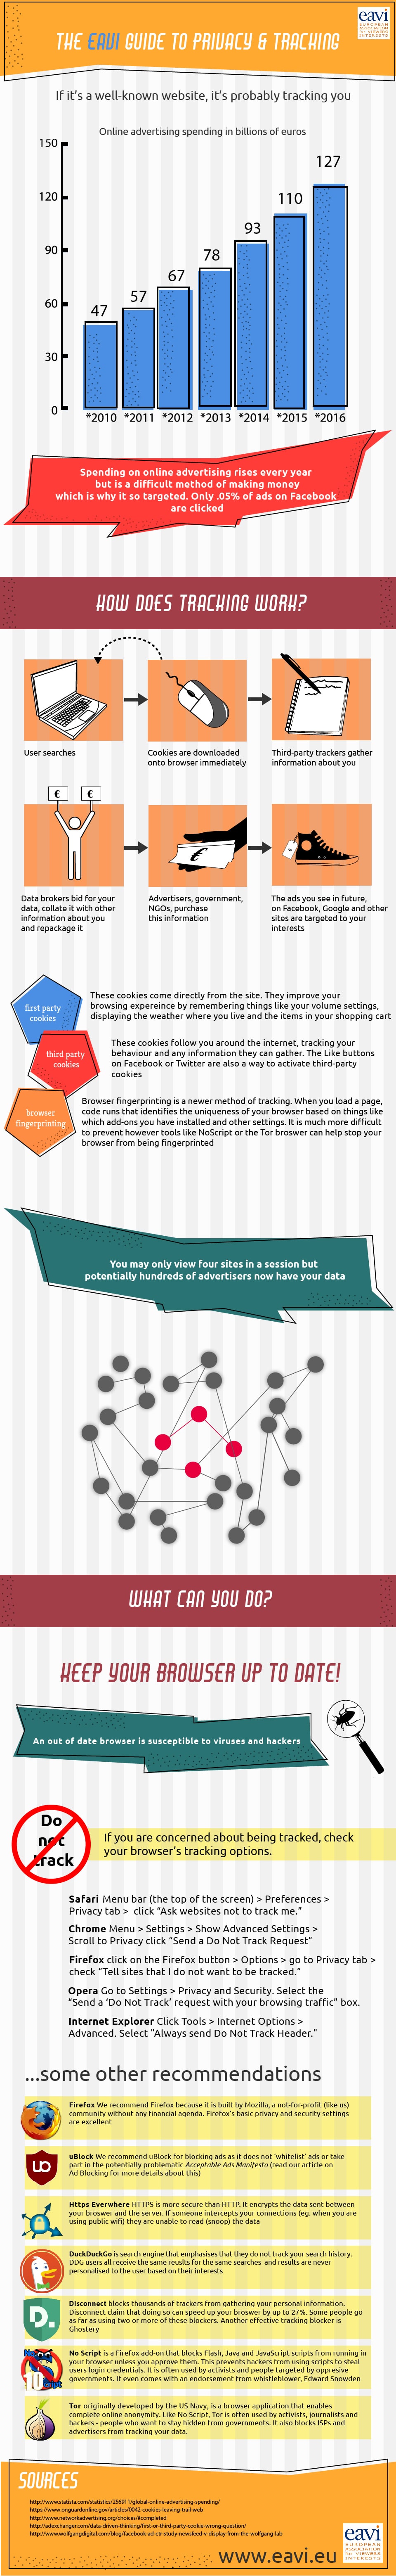 How-companies-track-you-online-infographic_FINAL-01